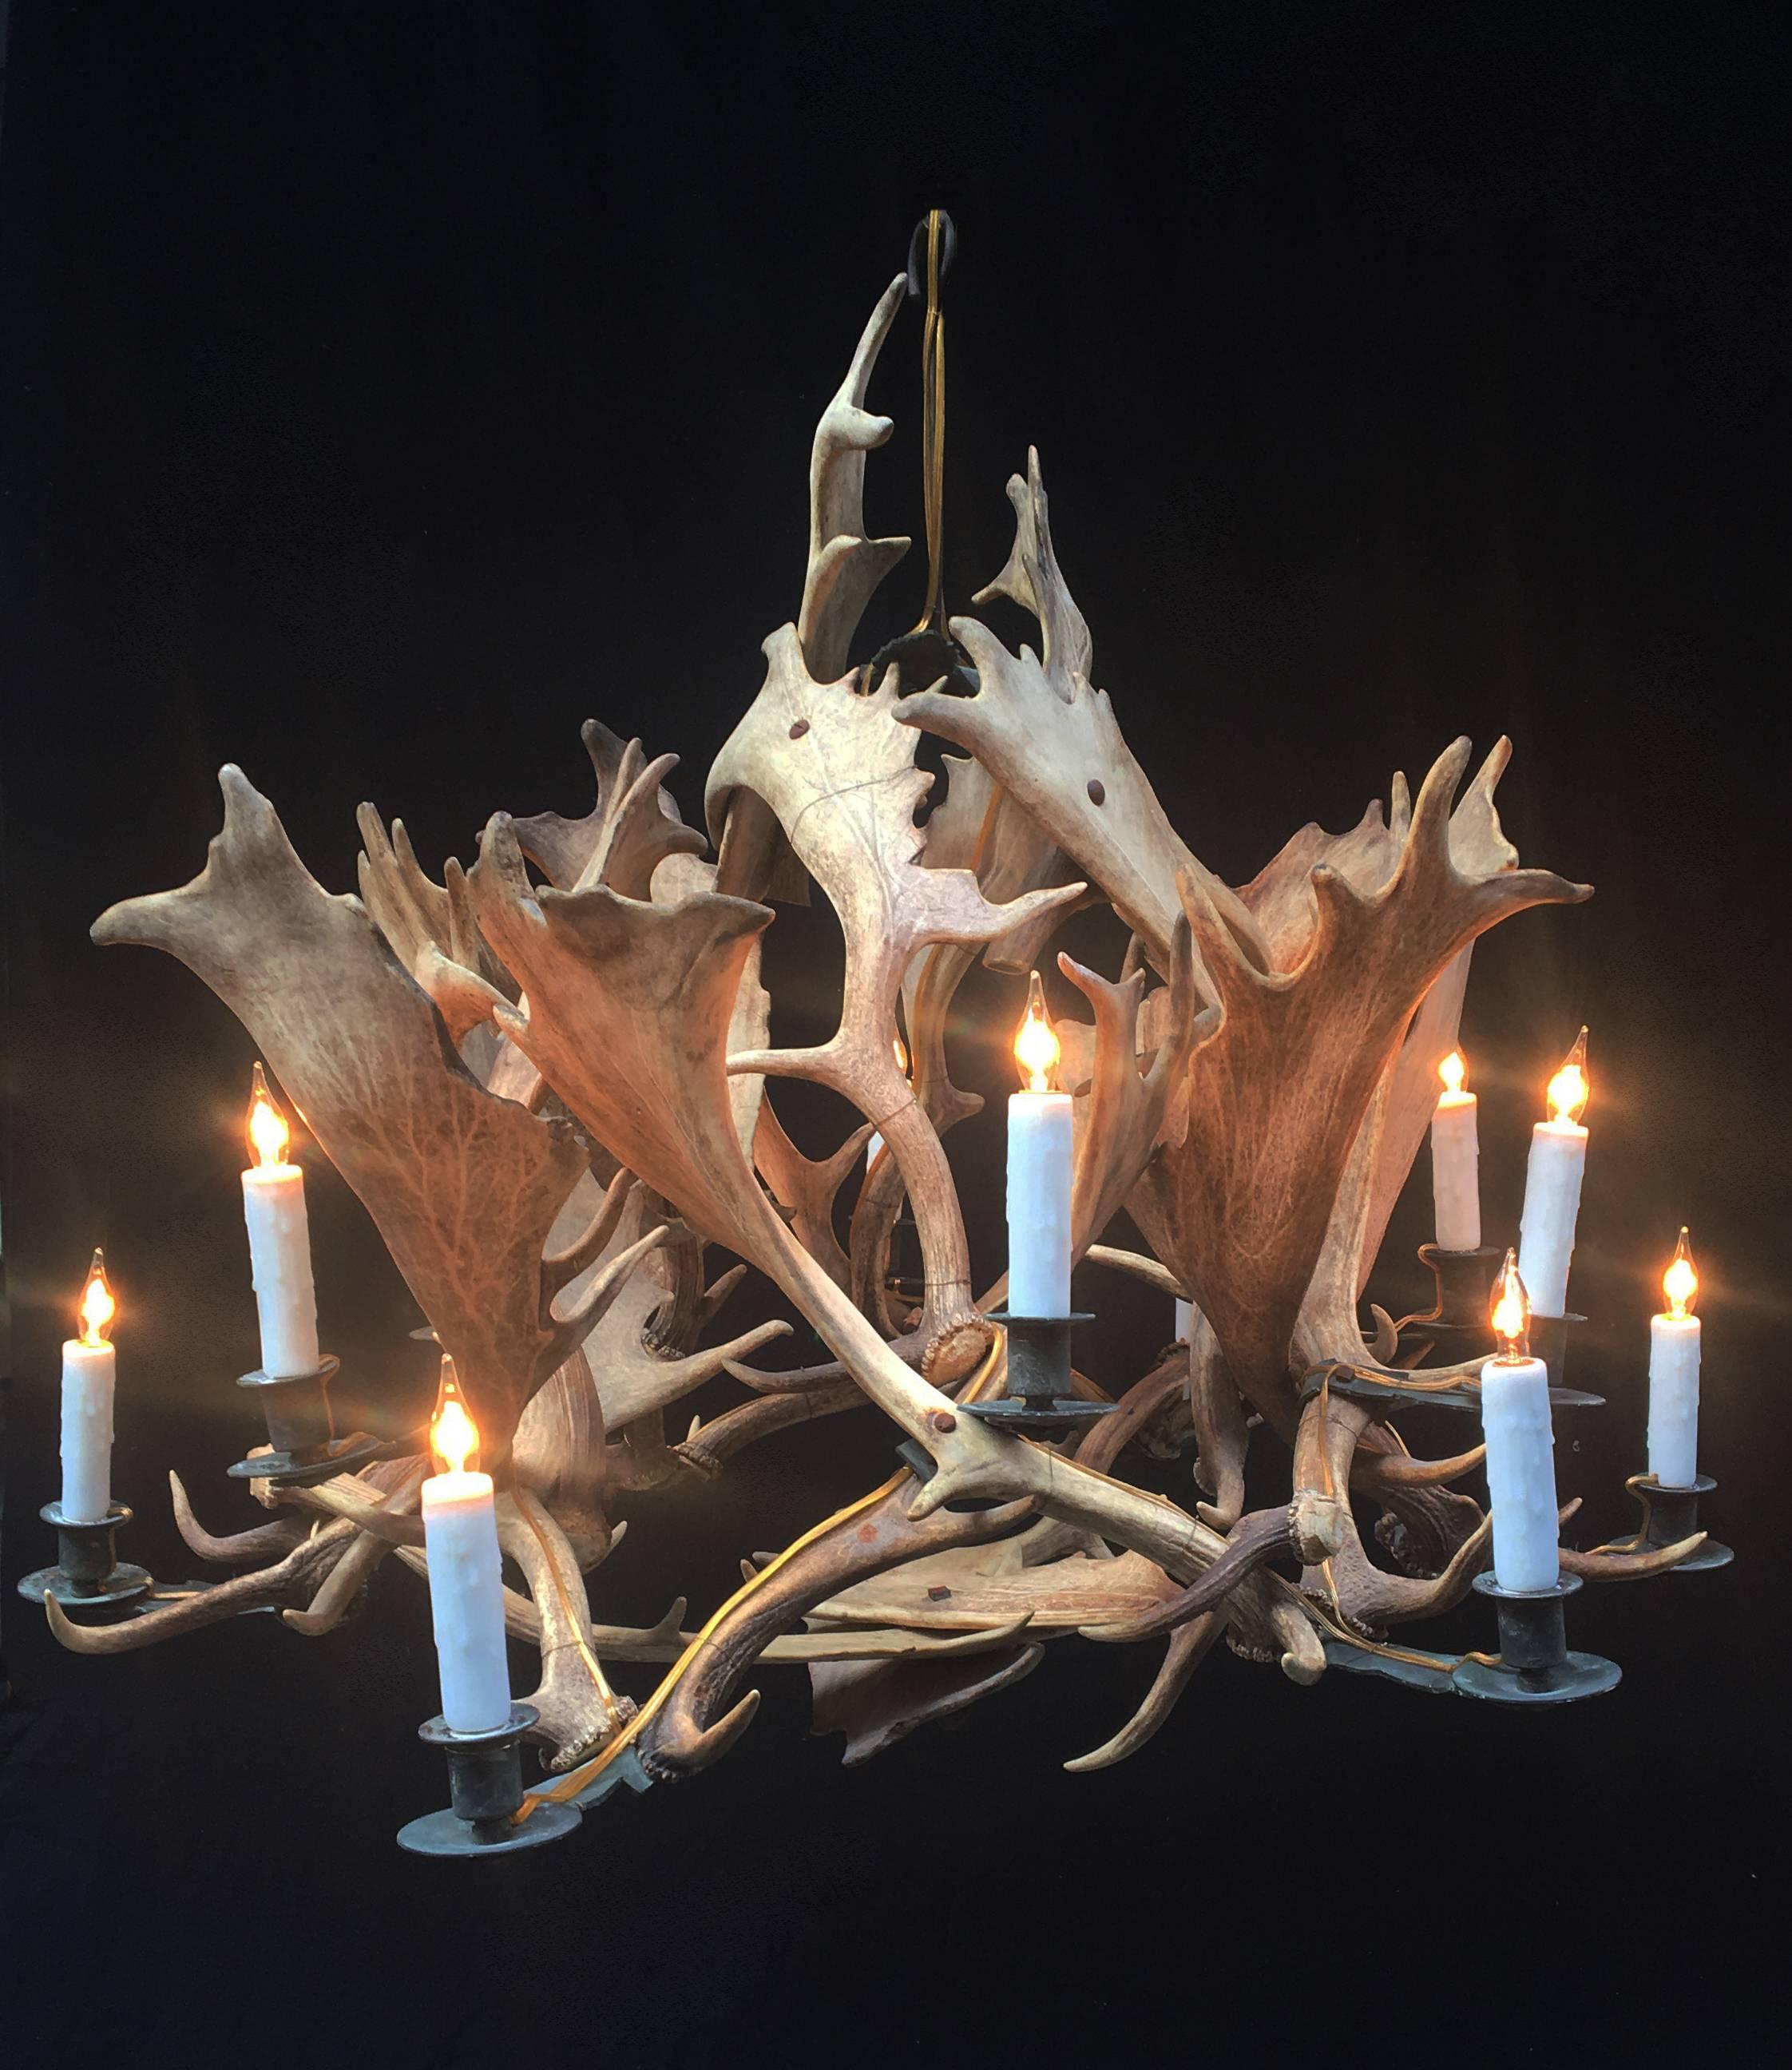 A chandelier made from shed antlers that was originally candle, since electrified, circa 1850. The candleholders are hand-wrought bronze and display 12 lights.